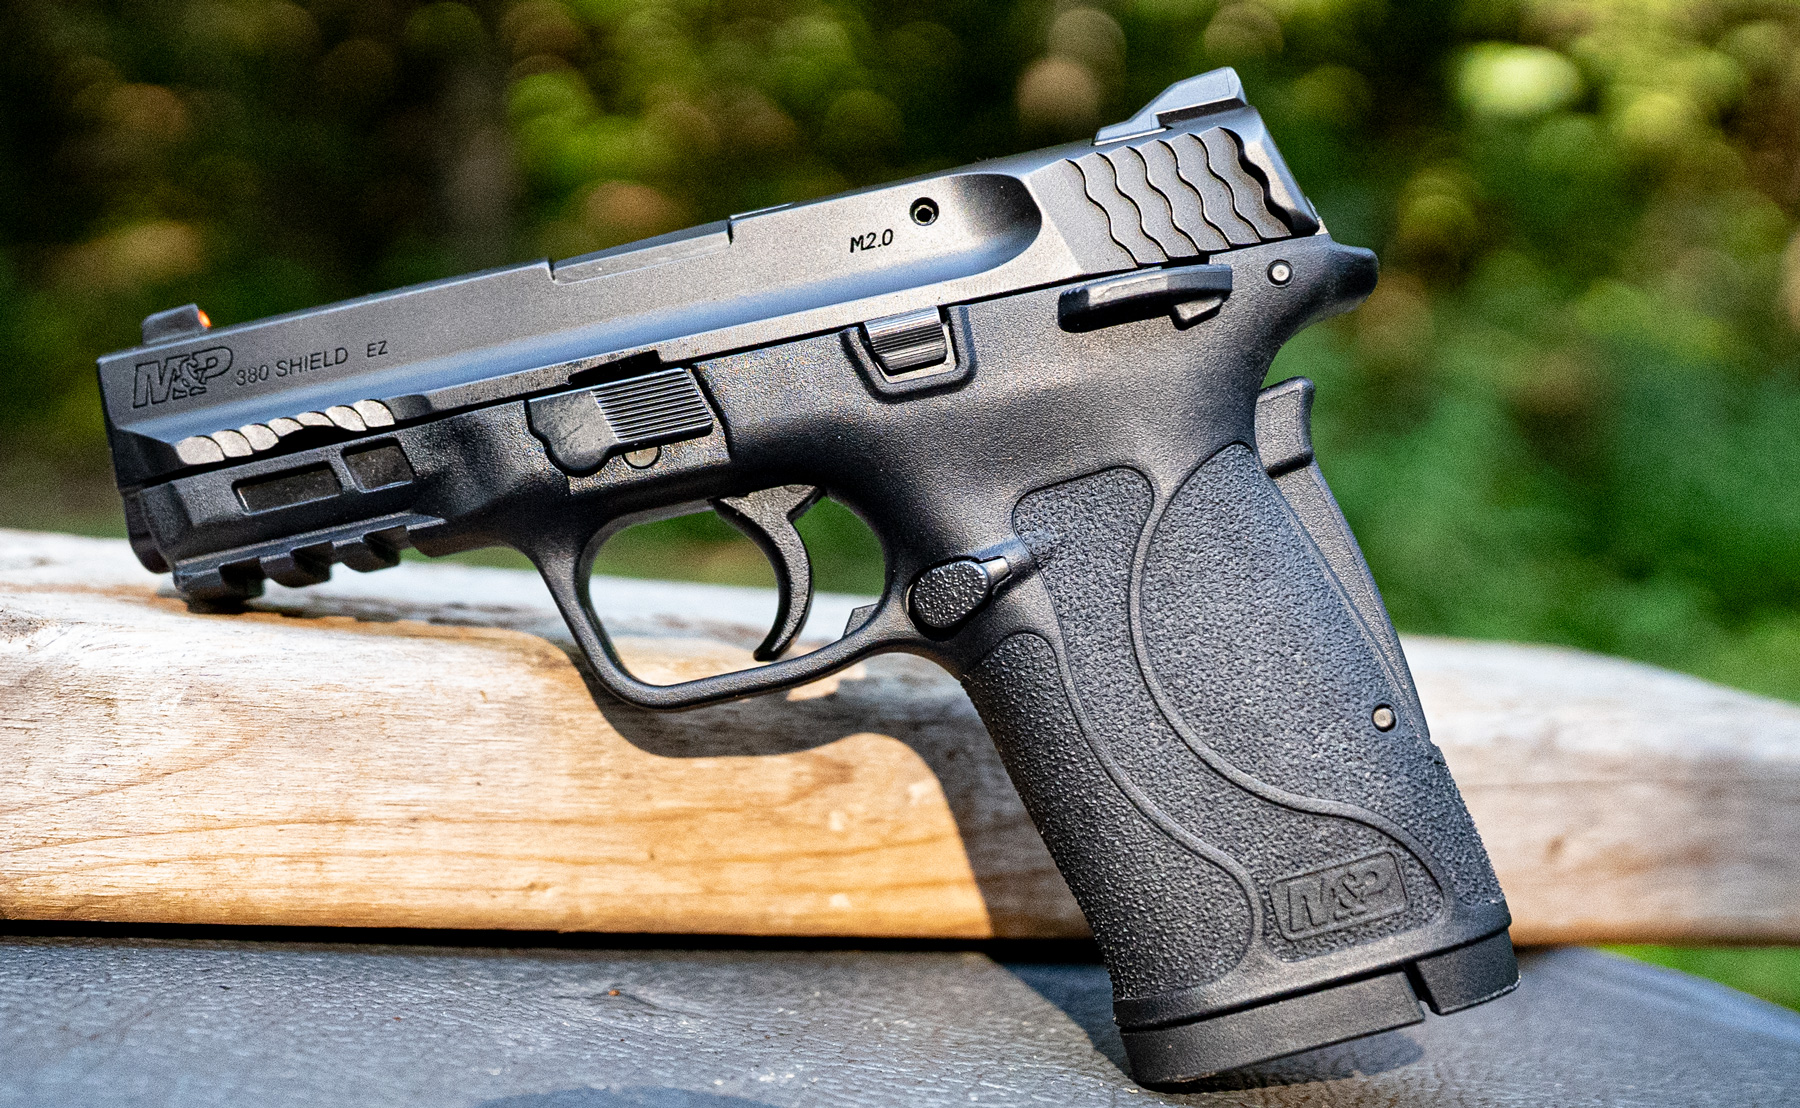 Smith & Wesson's Shield 380 EZ - one of the best concealed carry guns available